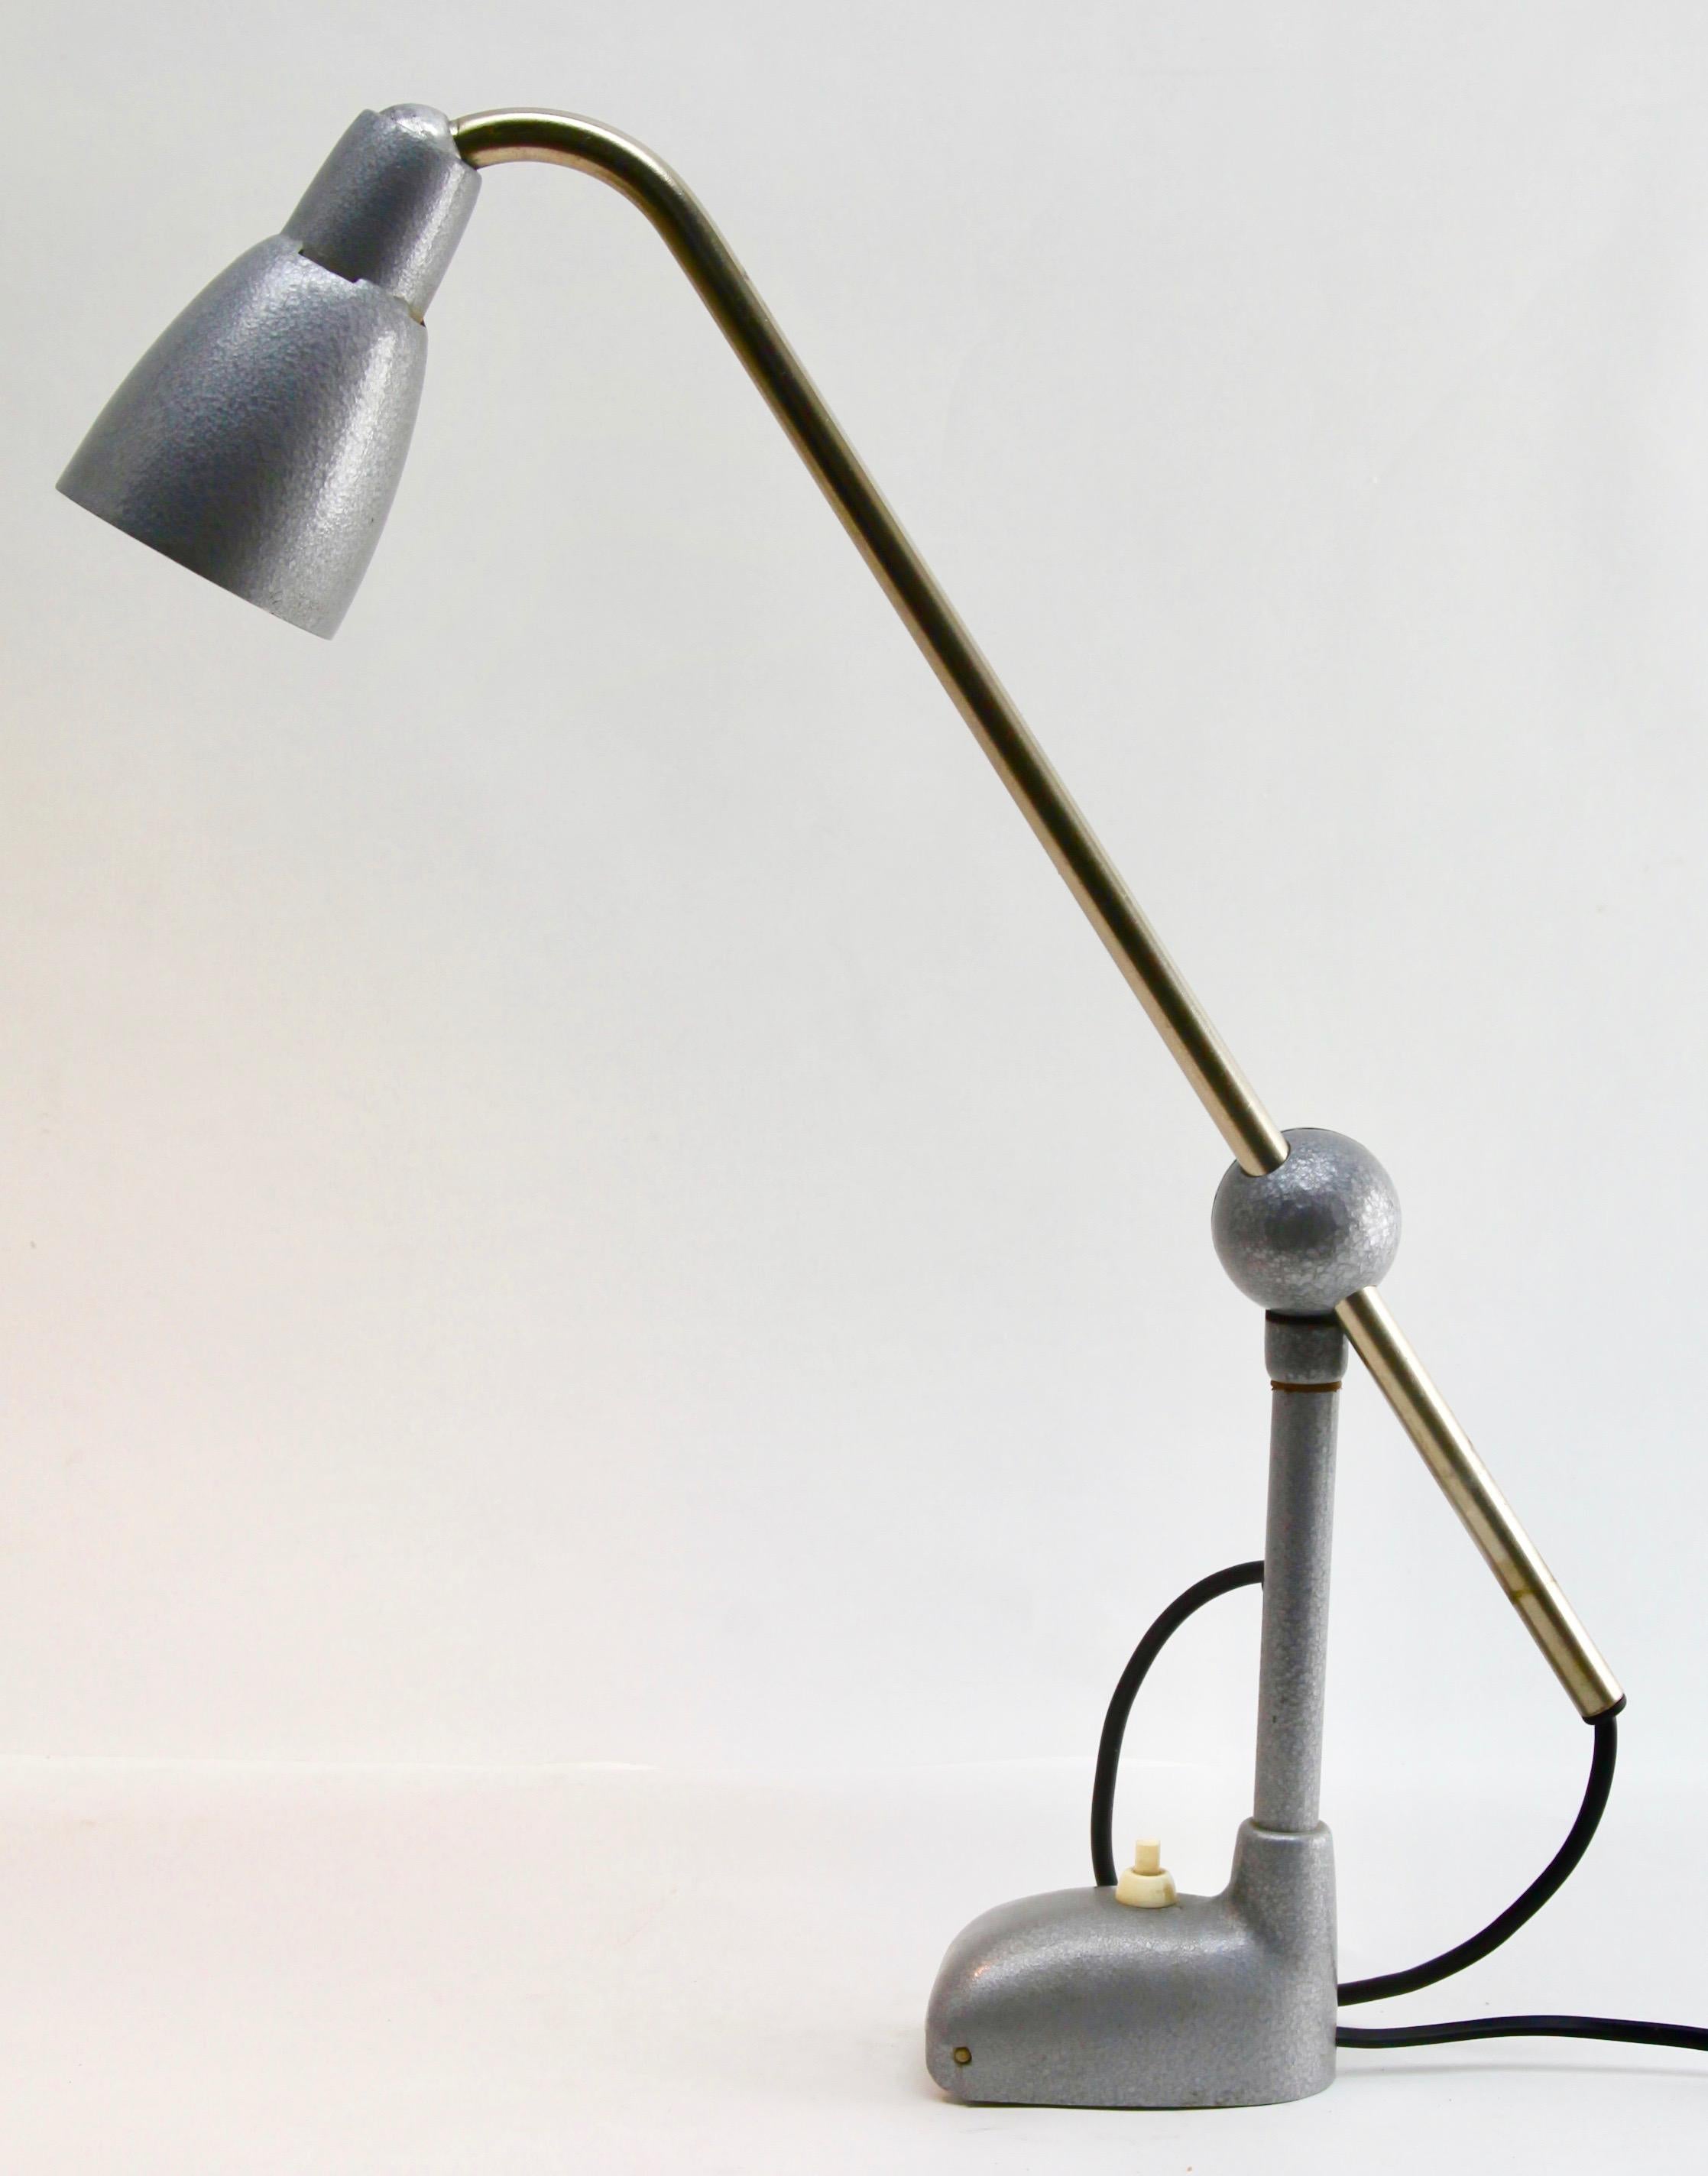 Machine-Made Industrial Work-Light 'Desk Lamp' in Silver-Grey with Concealed Screw-Down Base For Sale